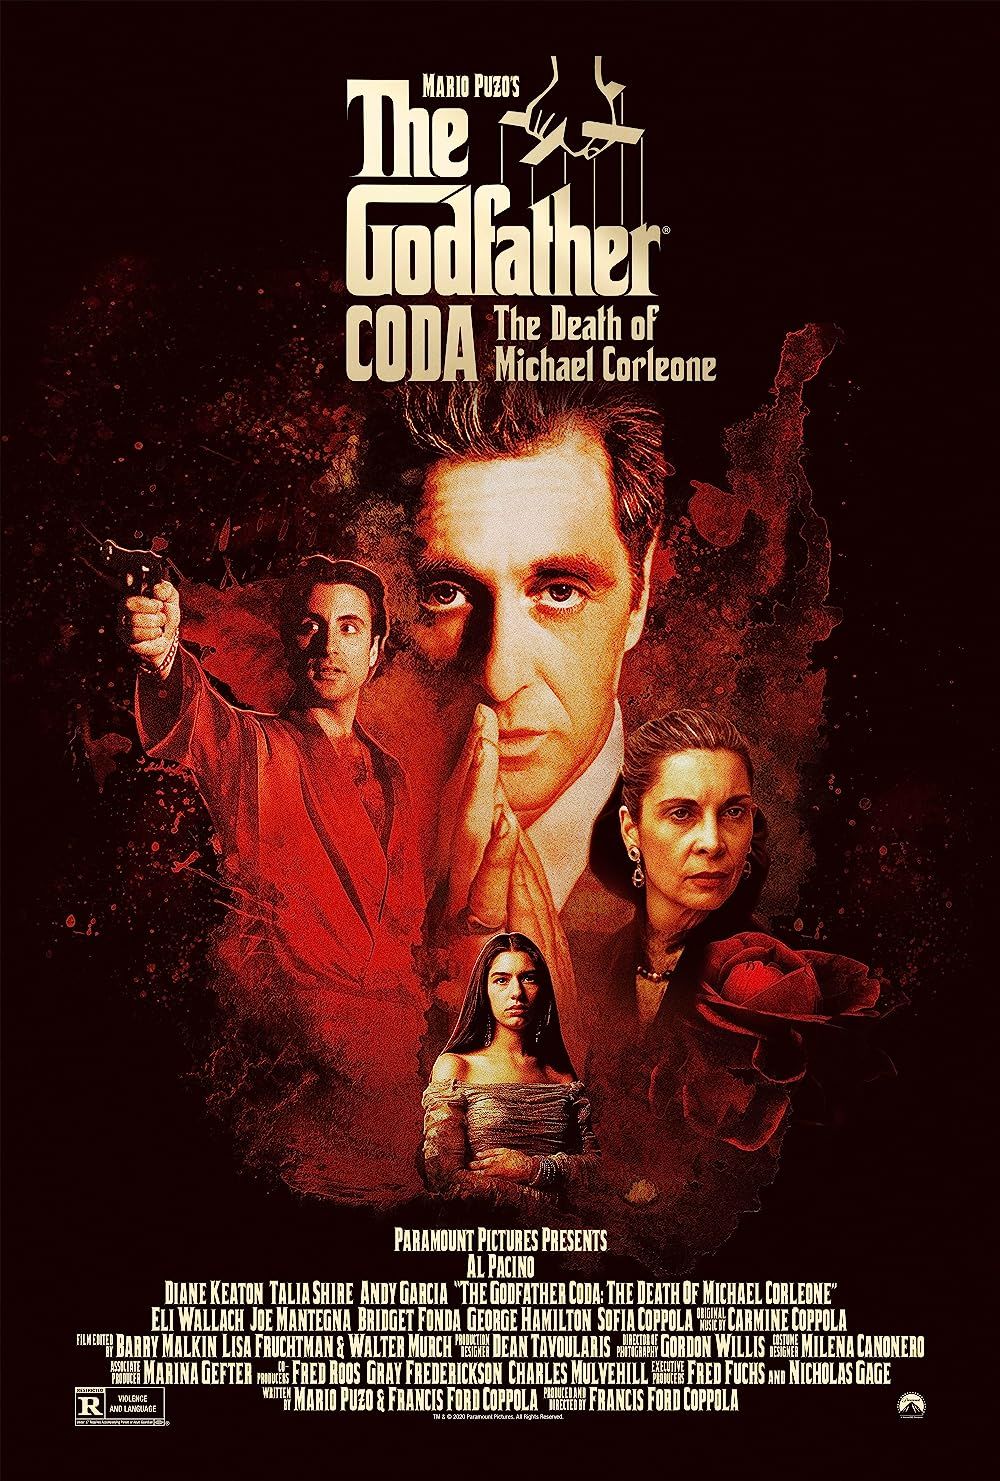 Al Pacino, Andy Garcia, Sofia Coppola, and Talia Shire in The Godfather Part III movie poster